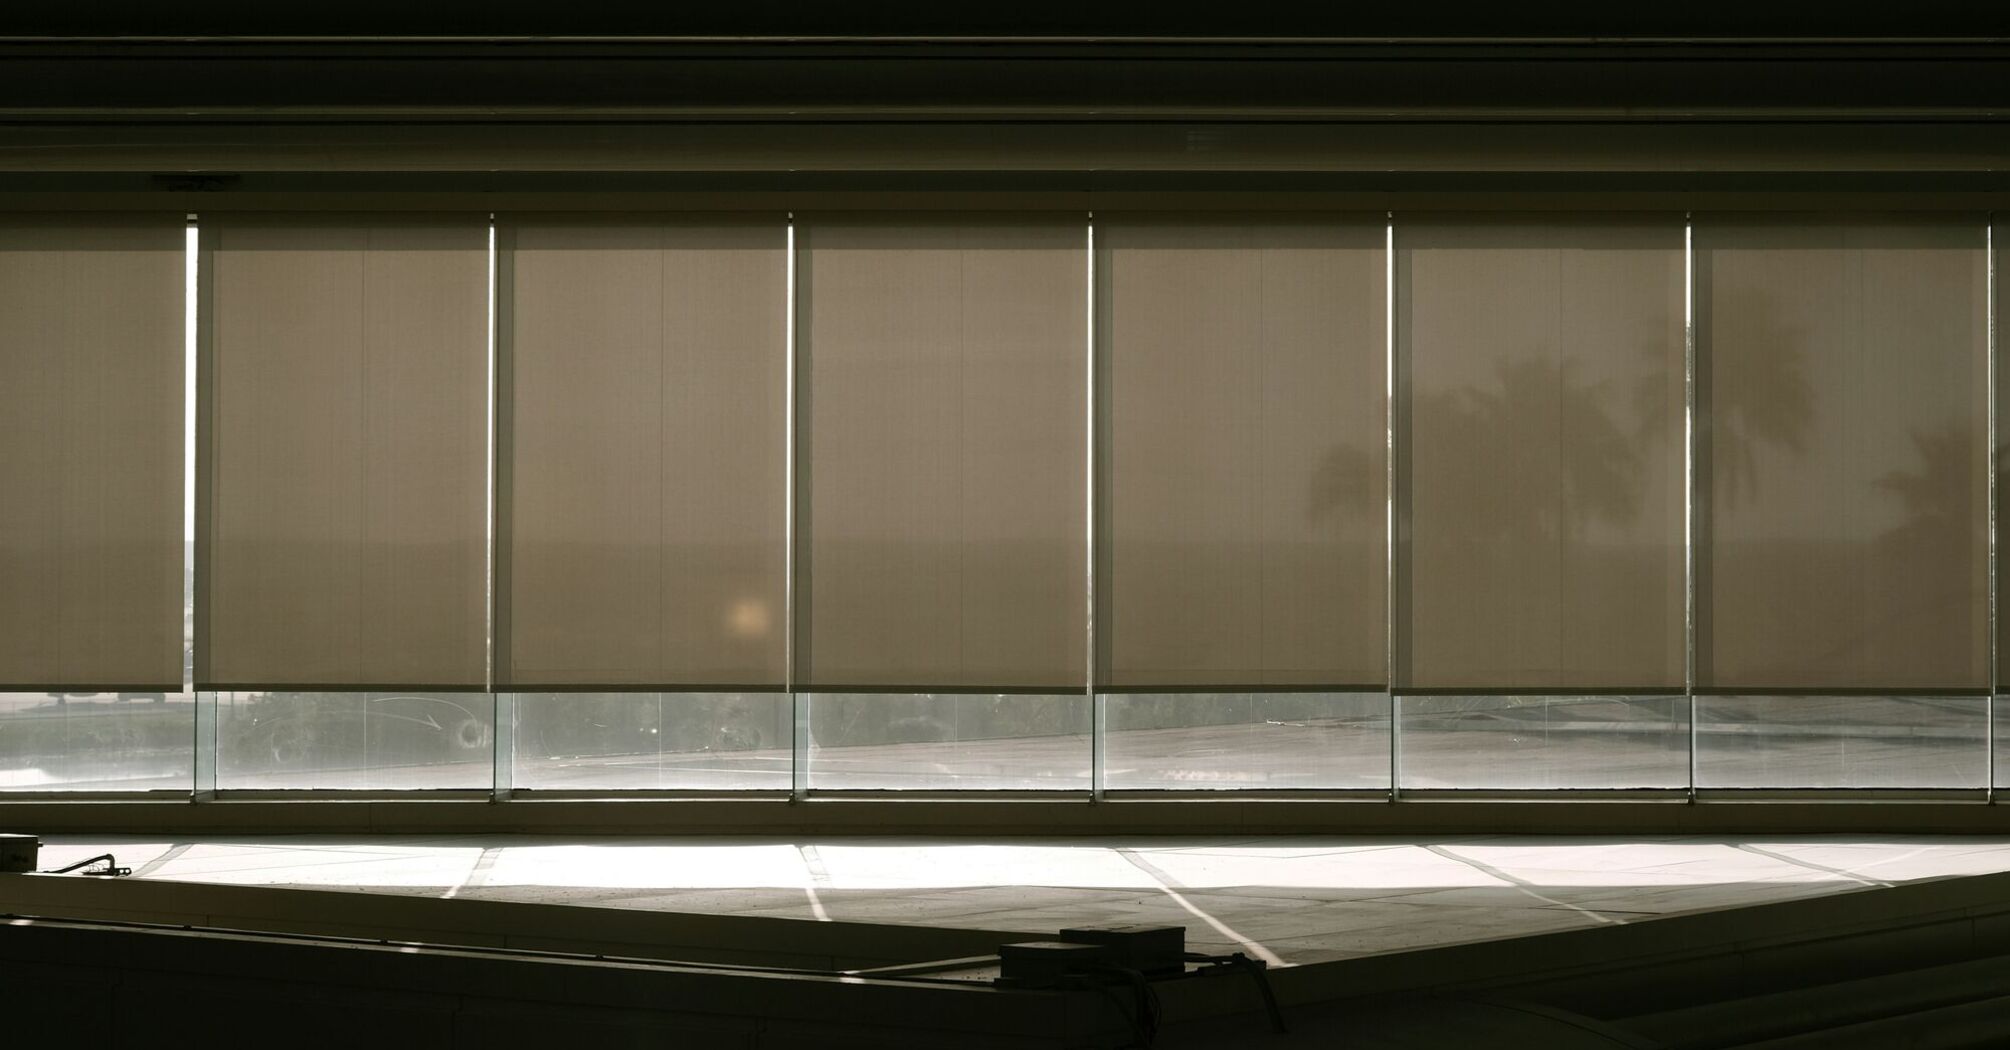 A window with blinds in a dark room